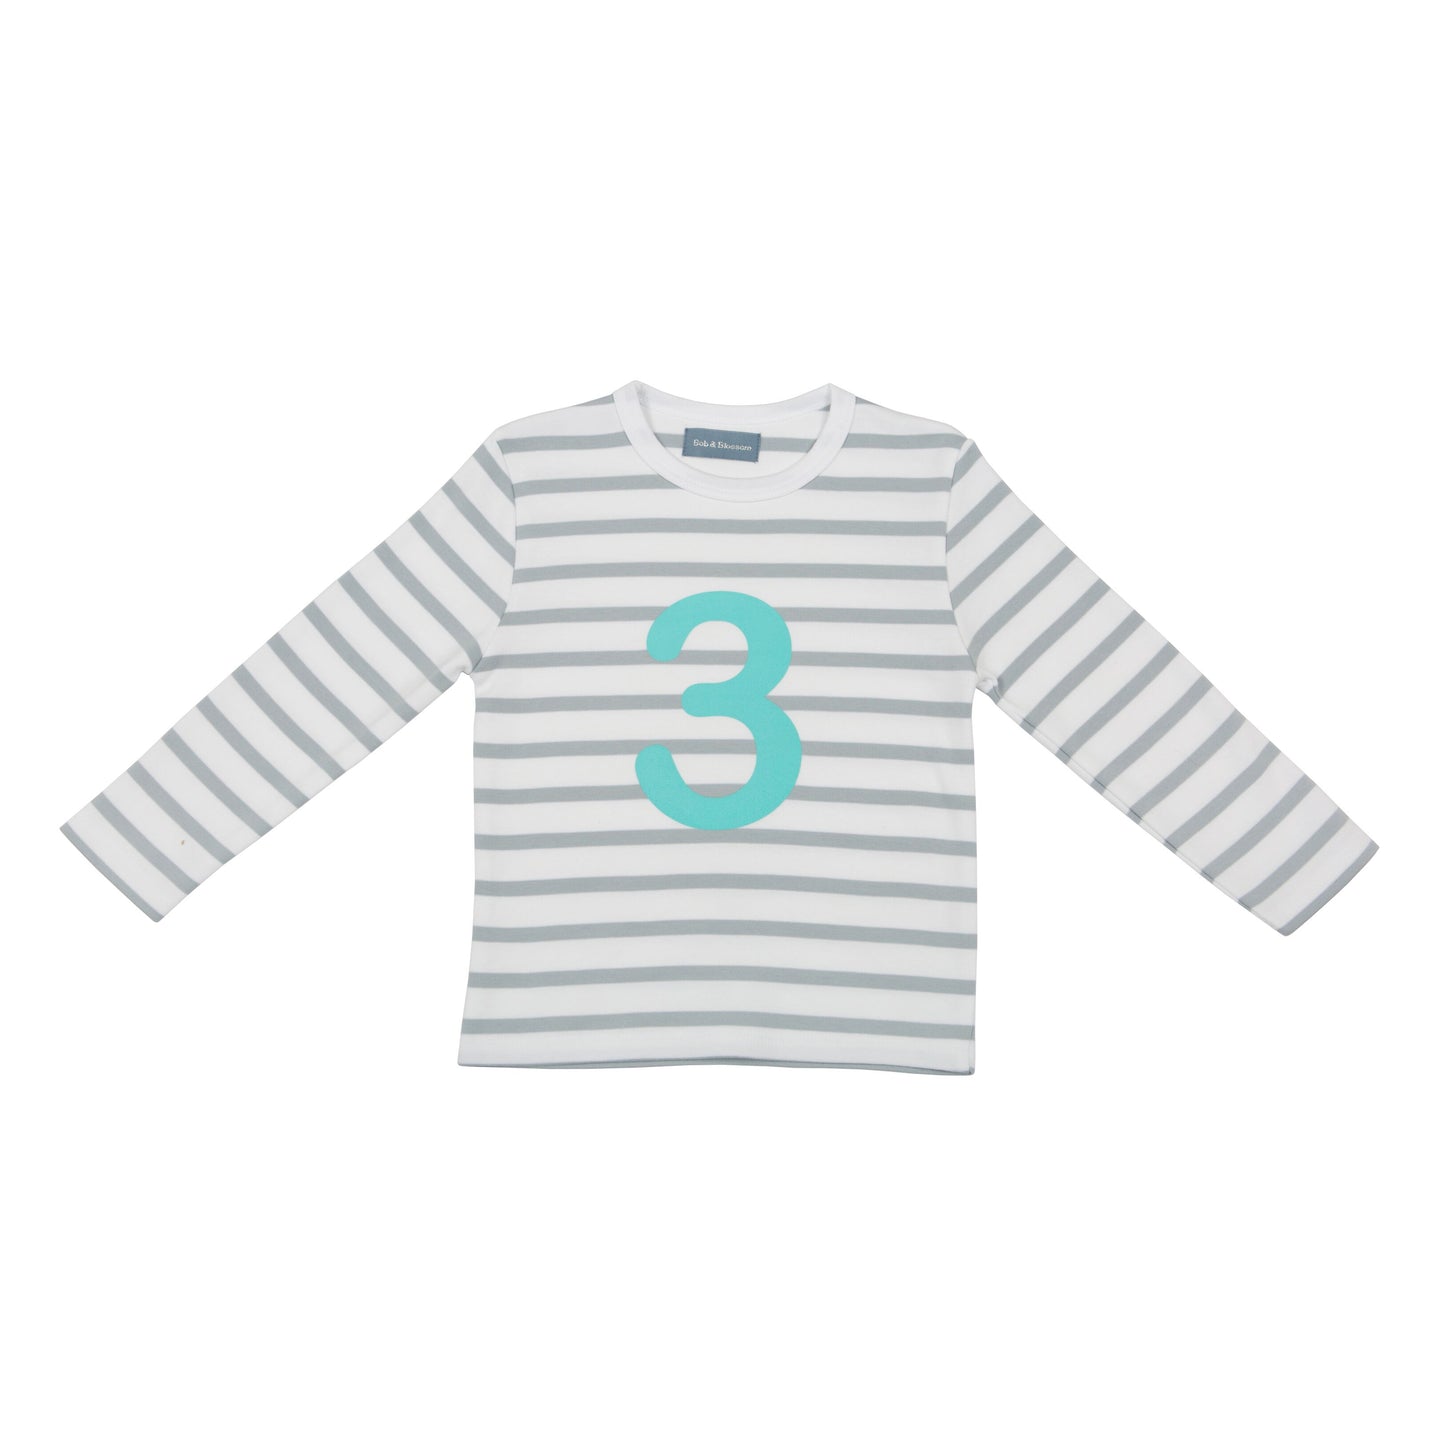 Bob & Blossom grey and white striped long sleeved t shirt with turquoise number 3